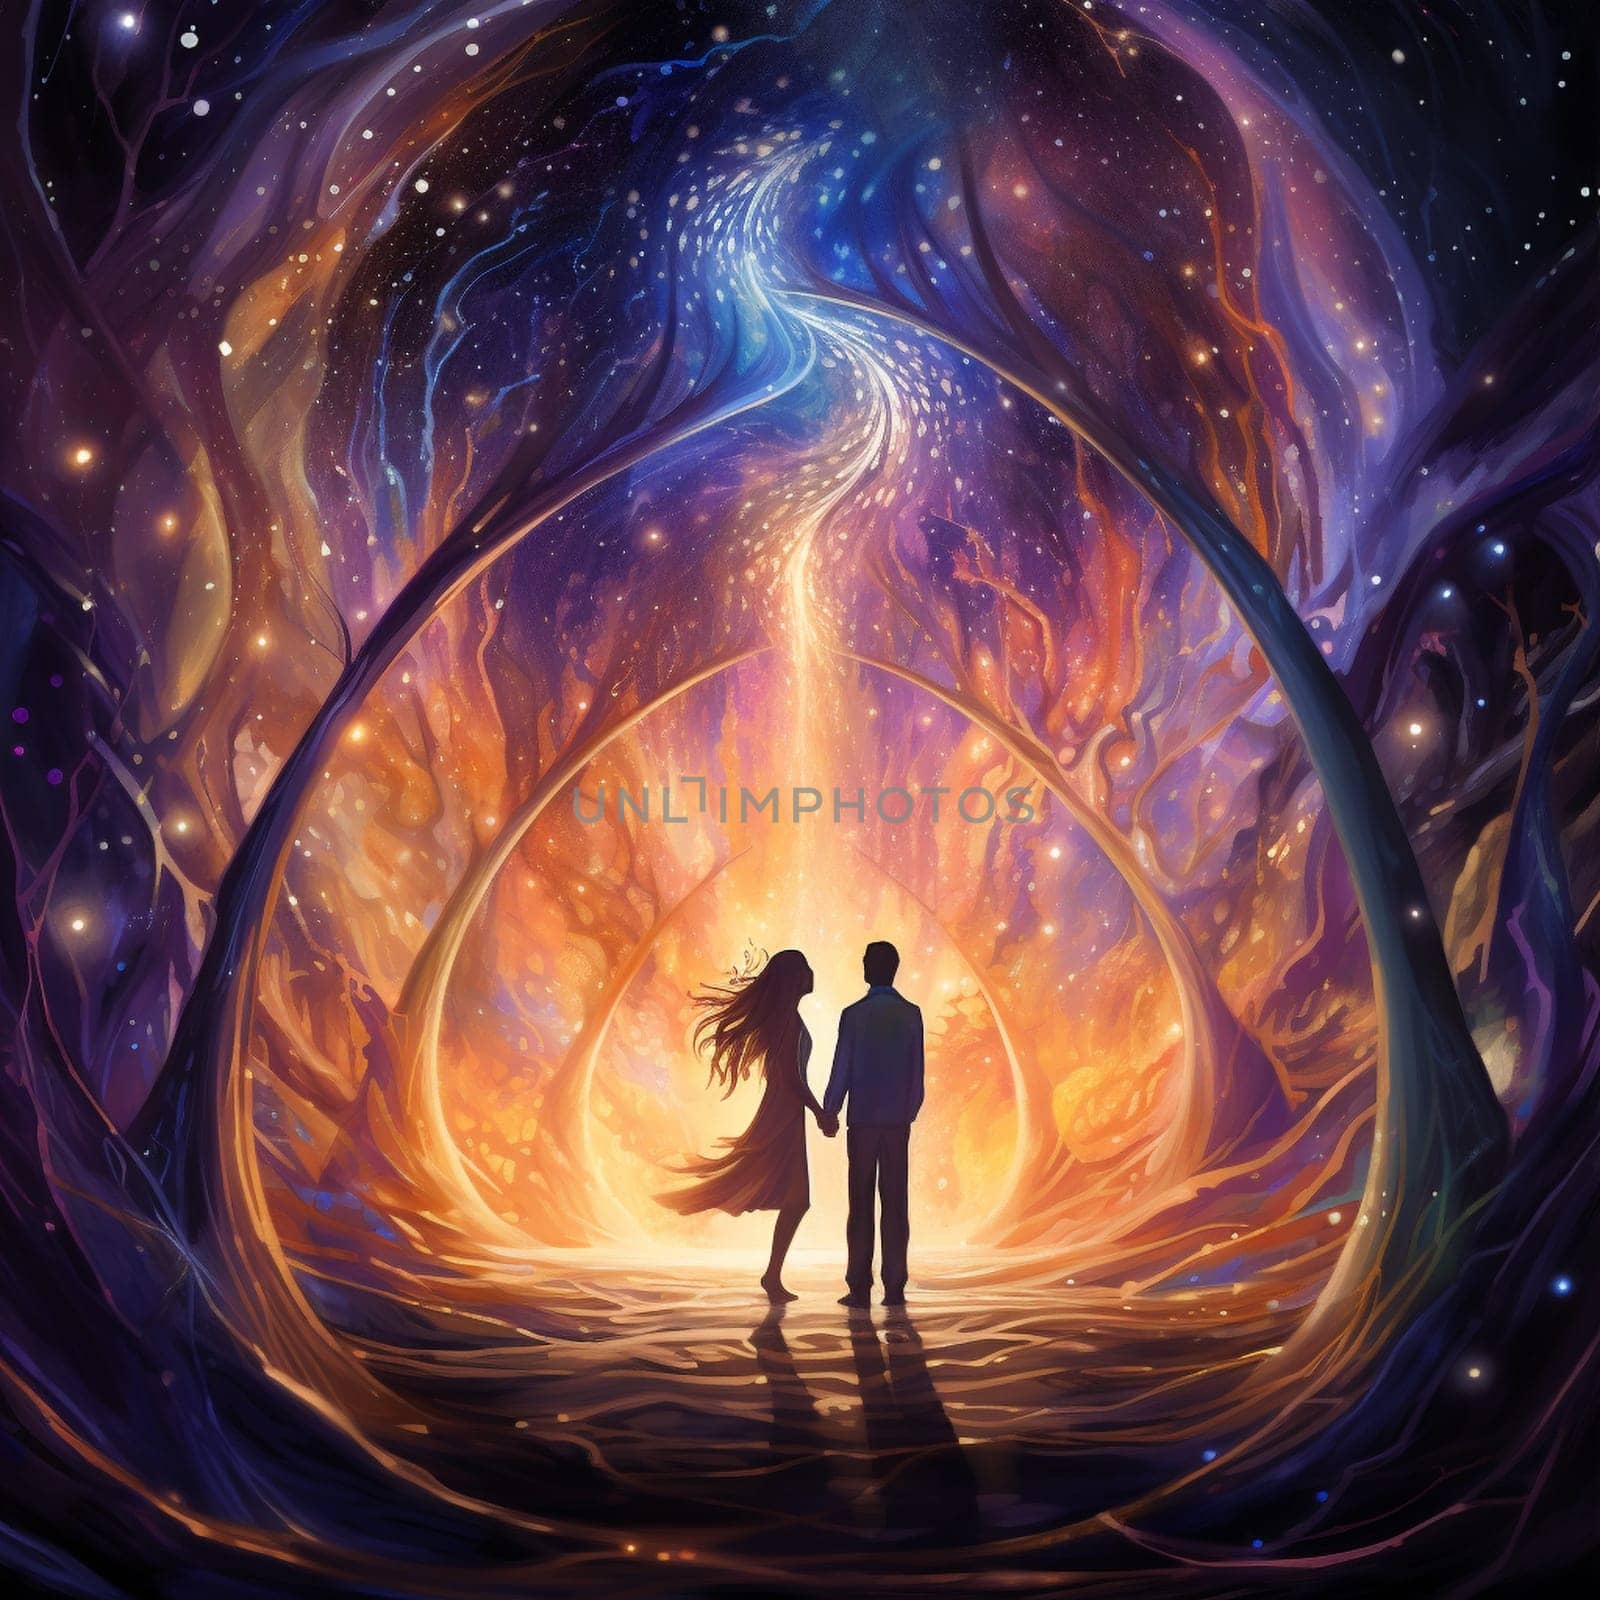 Immerse yourself in a world of love and cosmic wonder with this vibrant and surreal image. Witness a couple standing under a glowing cosmic archway, surrounded by intertwining celestial elements as they exchange heartfelt vows. The fantasy-inspired art style adds an ethereal beauty to the scene, captivating viewers and evoking emotions of love, wonder, and cosmic connection.